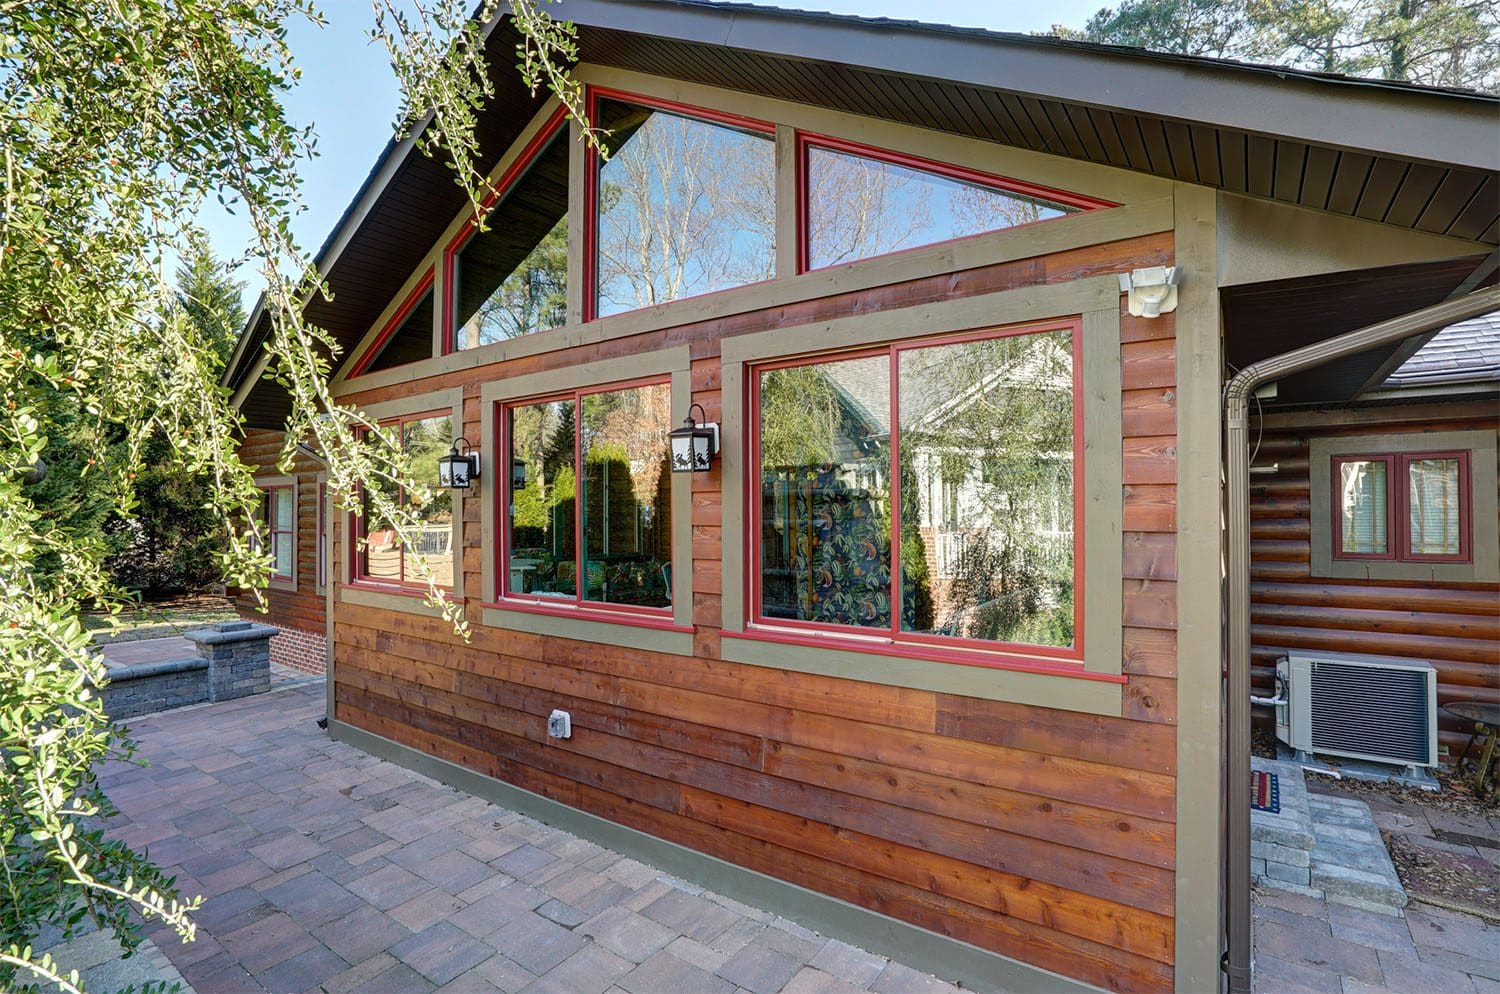 Rustic cabin-style sunroom with stained wood siding, adorned with red trim around glass windows. A stone hardscape patio, designed and built by Deck Creations, extends from the sunroom, surrounded by nature and greenery. Bathed in sunlight, this cozy space harmonizes with its natural surroundings.